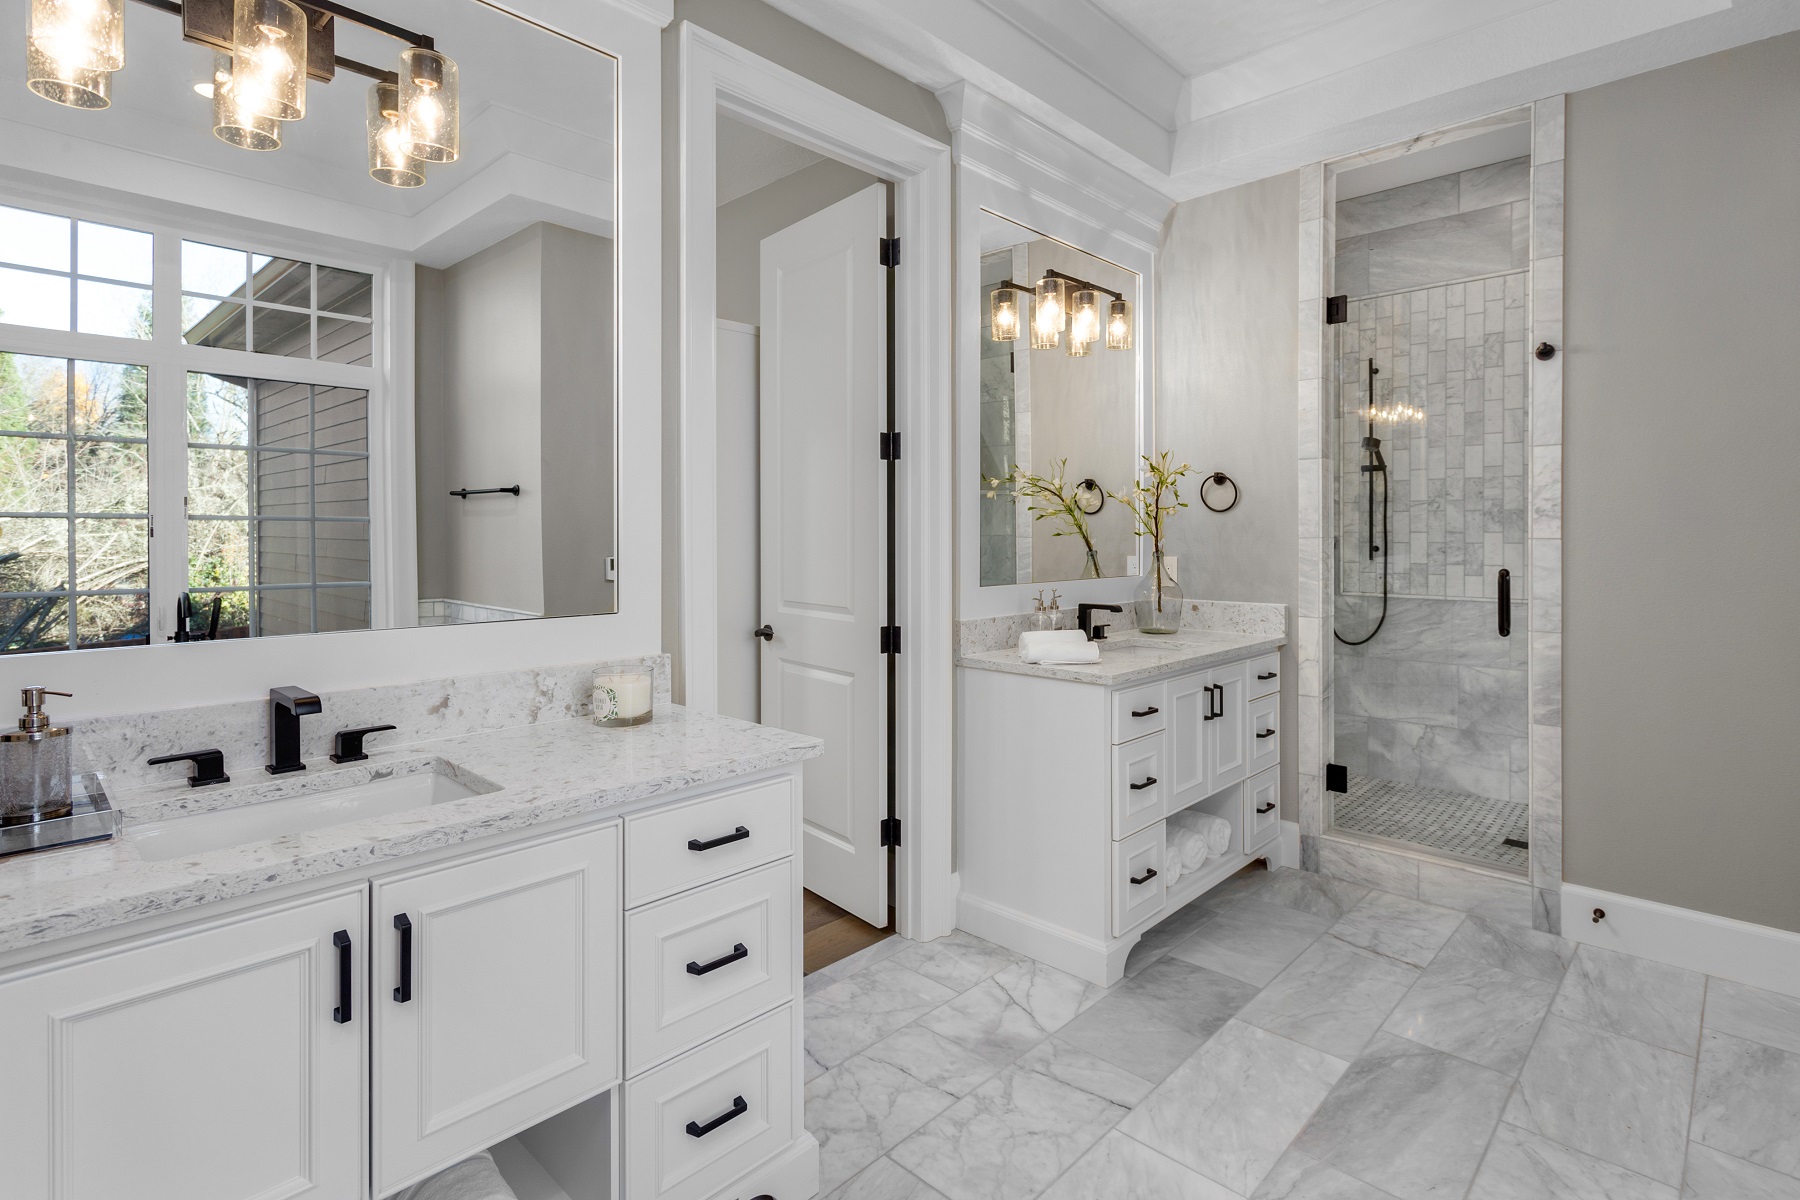 Updated 10 Ways How To Save Money On Your Bathroom Remodel